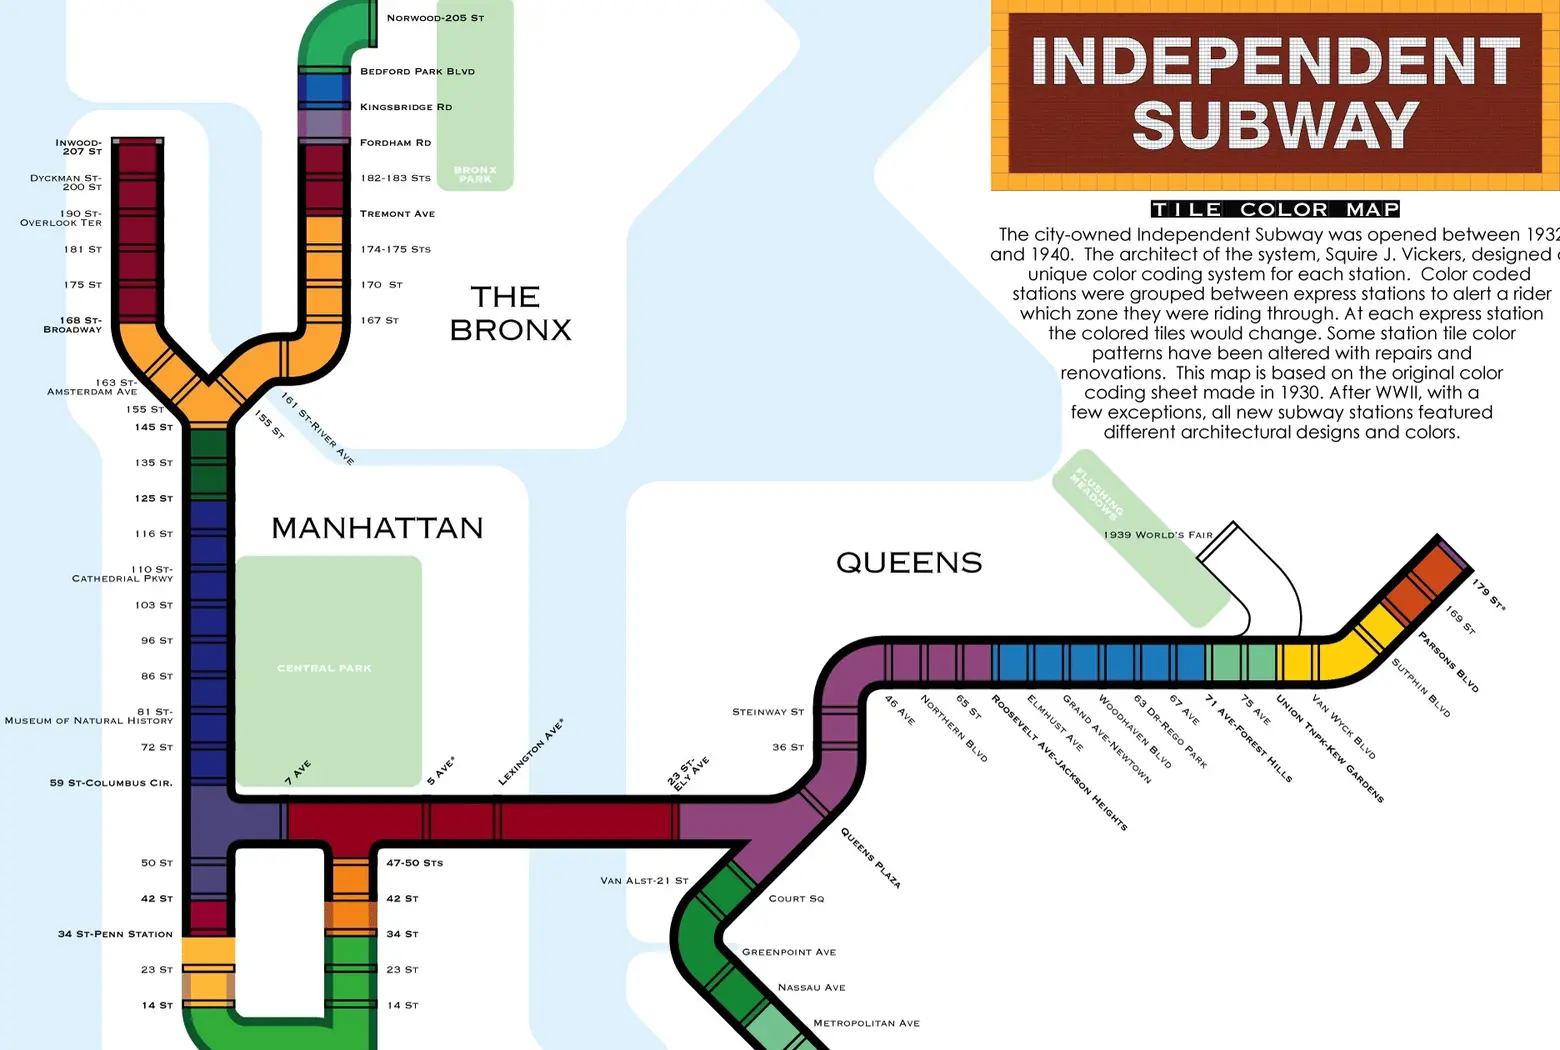 This Map Explains the Historic Tile Color System Used in NYC Subway Stations